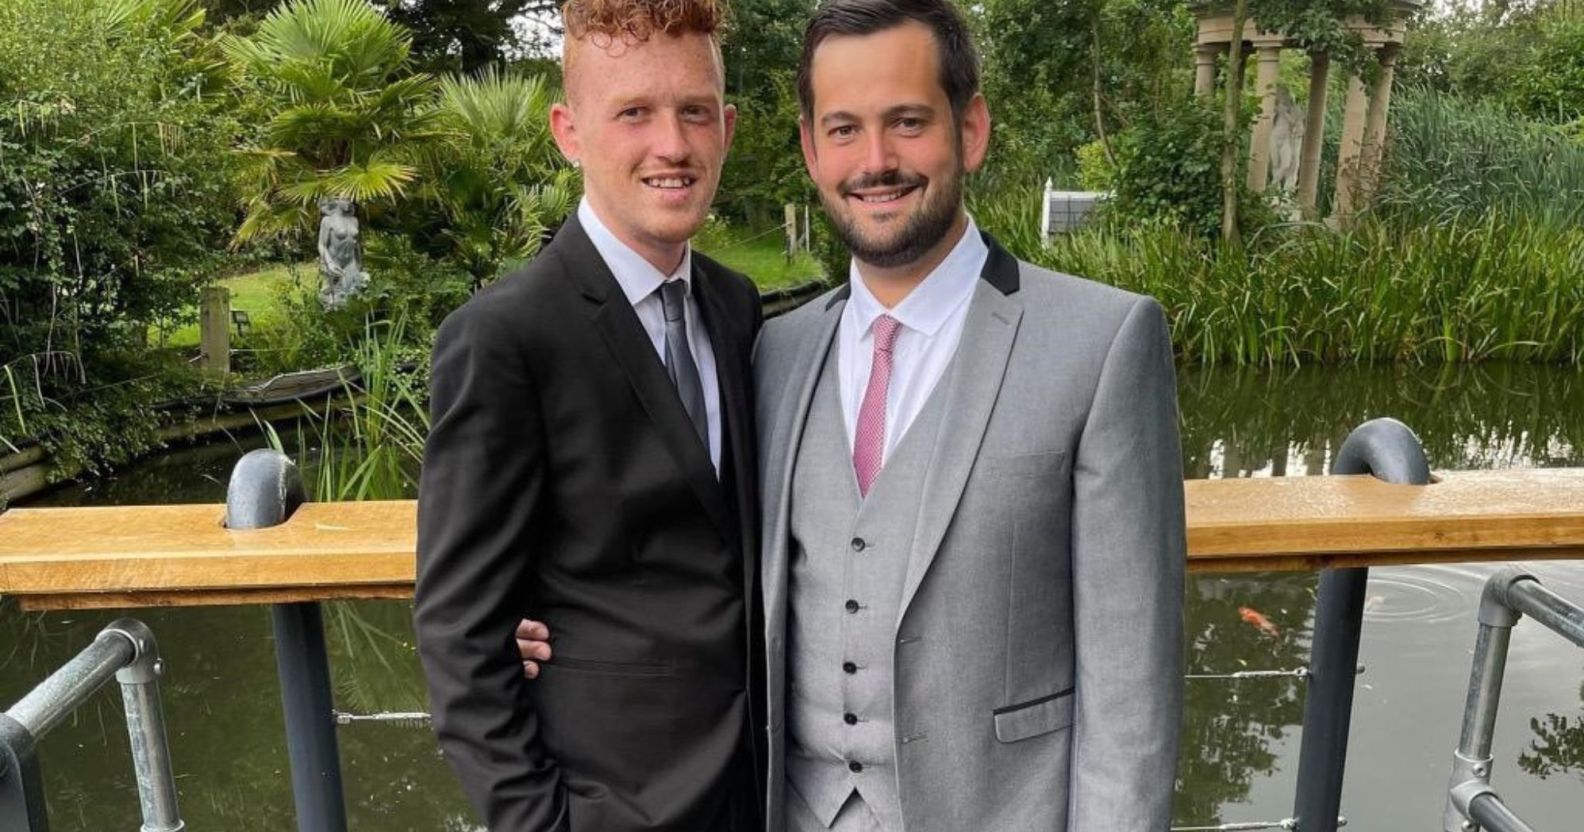 Ricardo and Bradleigh, a gay couple, wear suits and smile at the camera in an image shared as part of their promotion of fostering as a way to expand a family